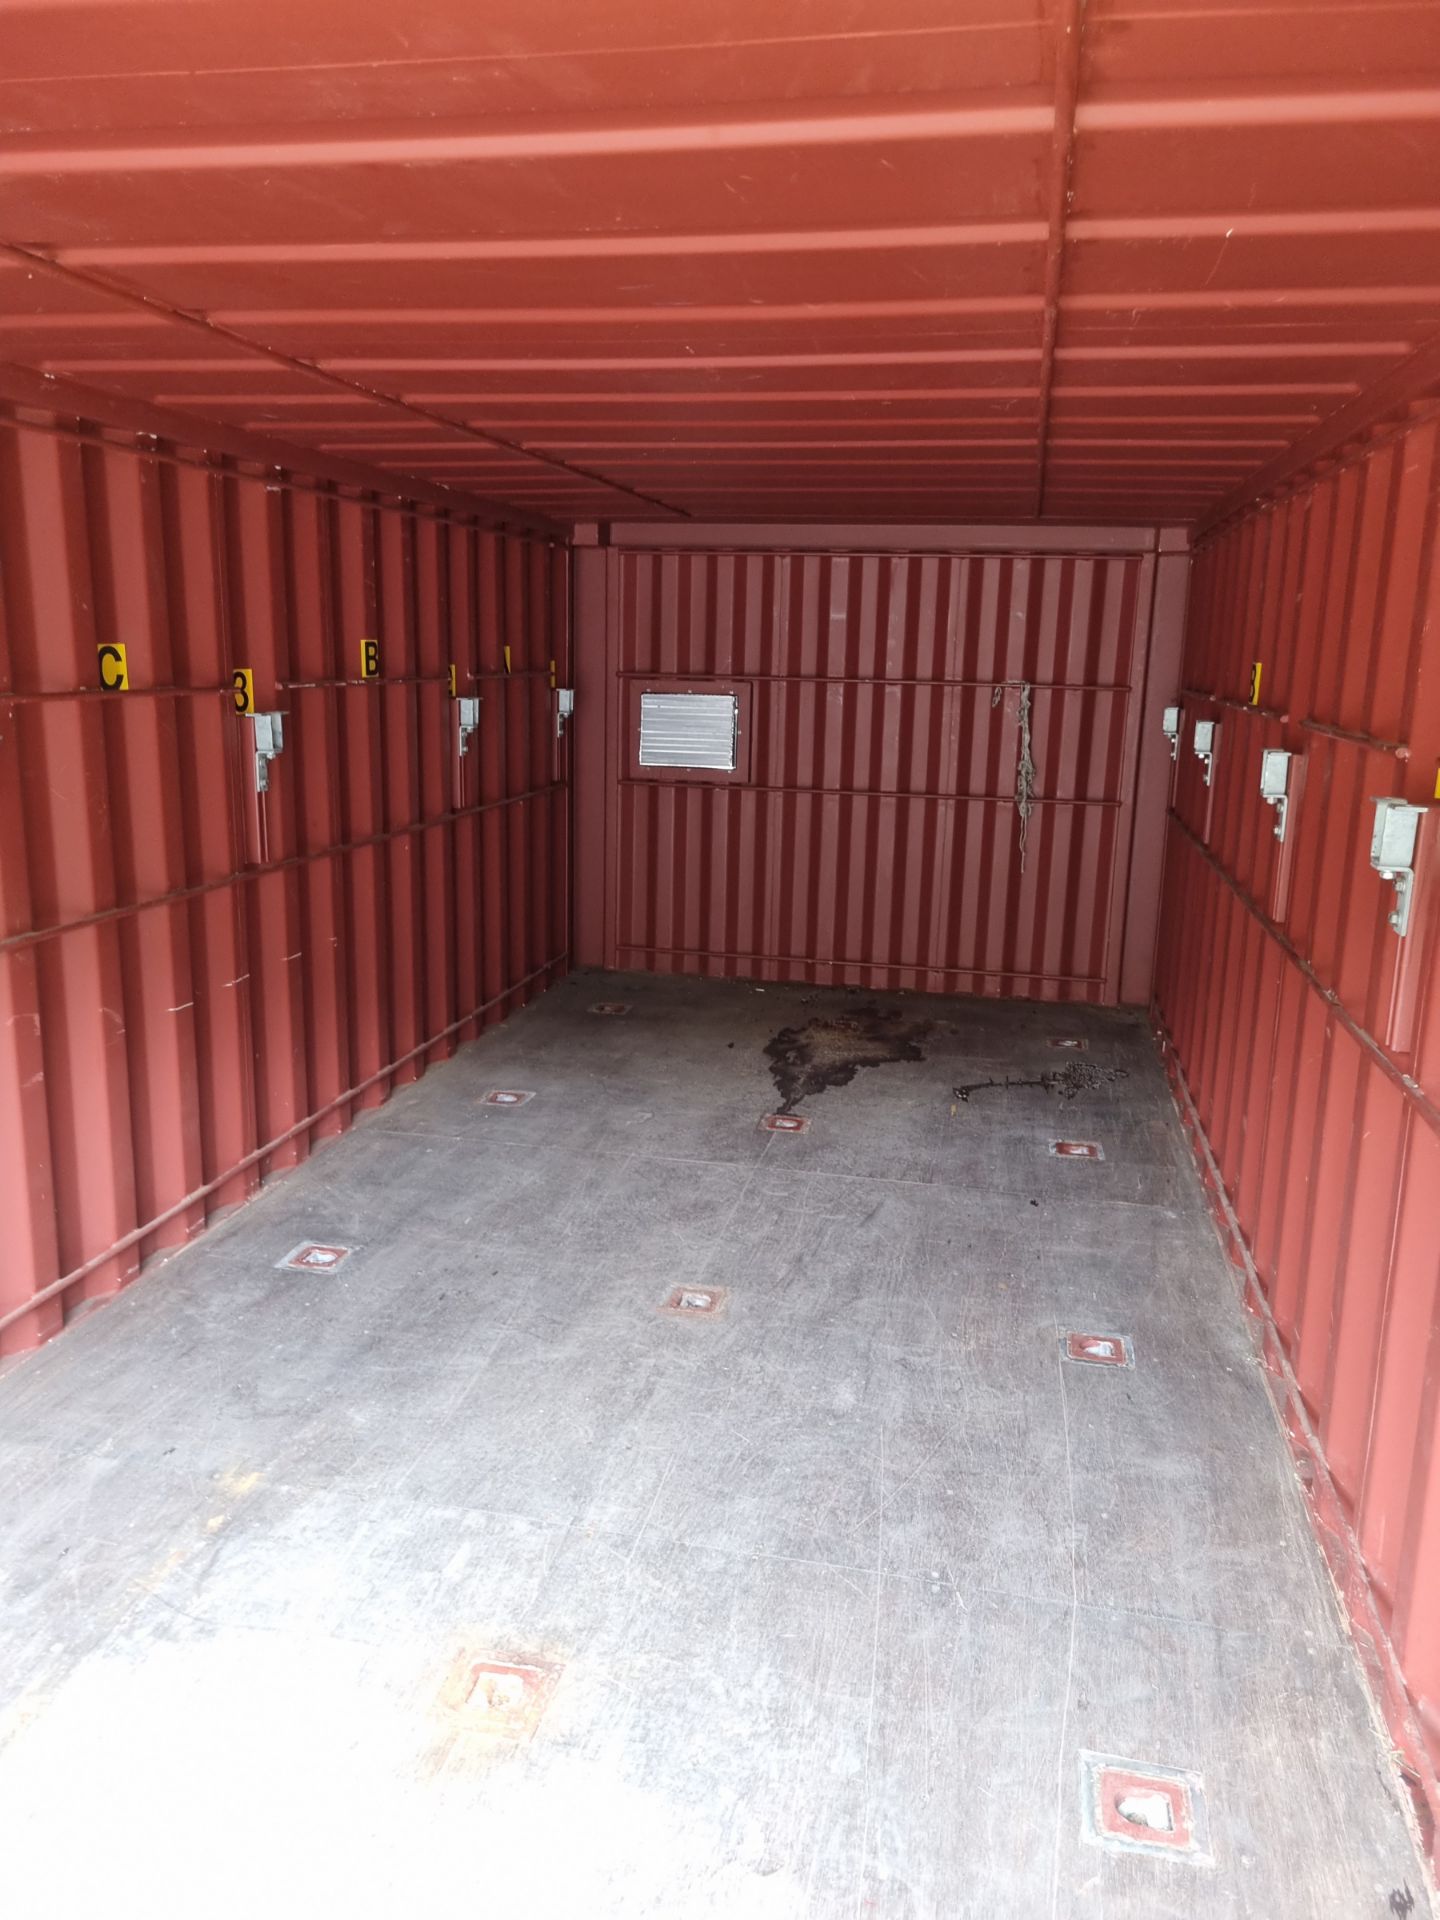 Stonehaven Engineering Ltd transportable storage container ISO 499/99/01 - dimensions: 20ft x 8ft x - Bild 6 aus 6